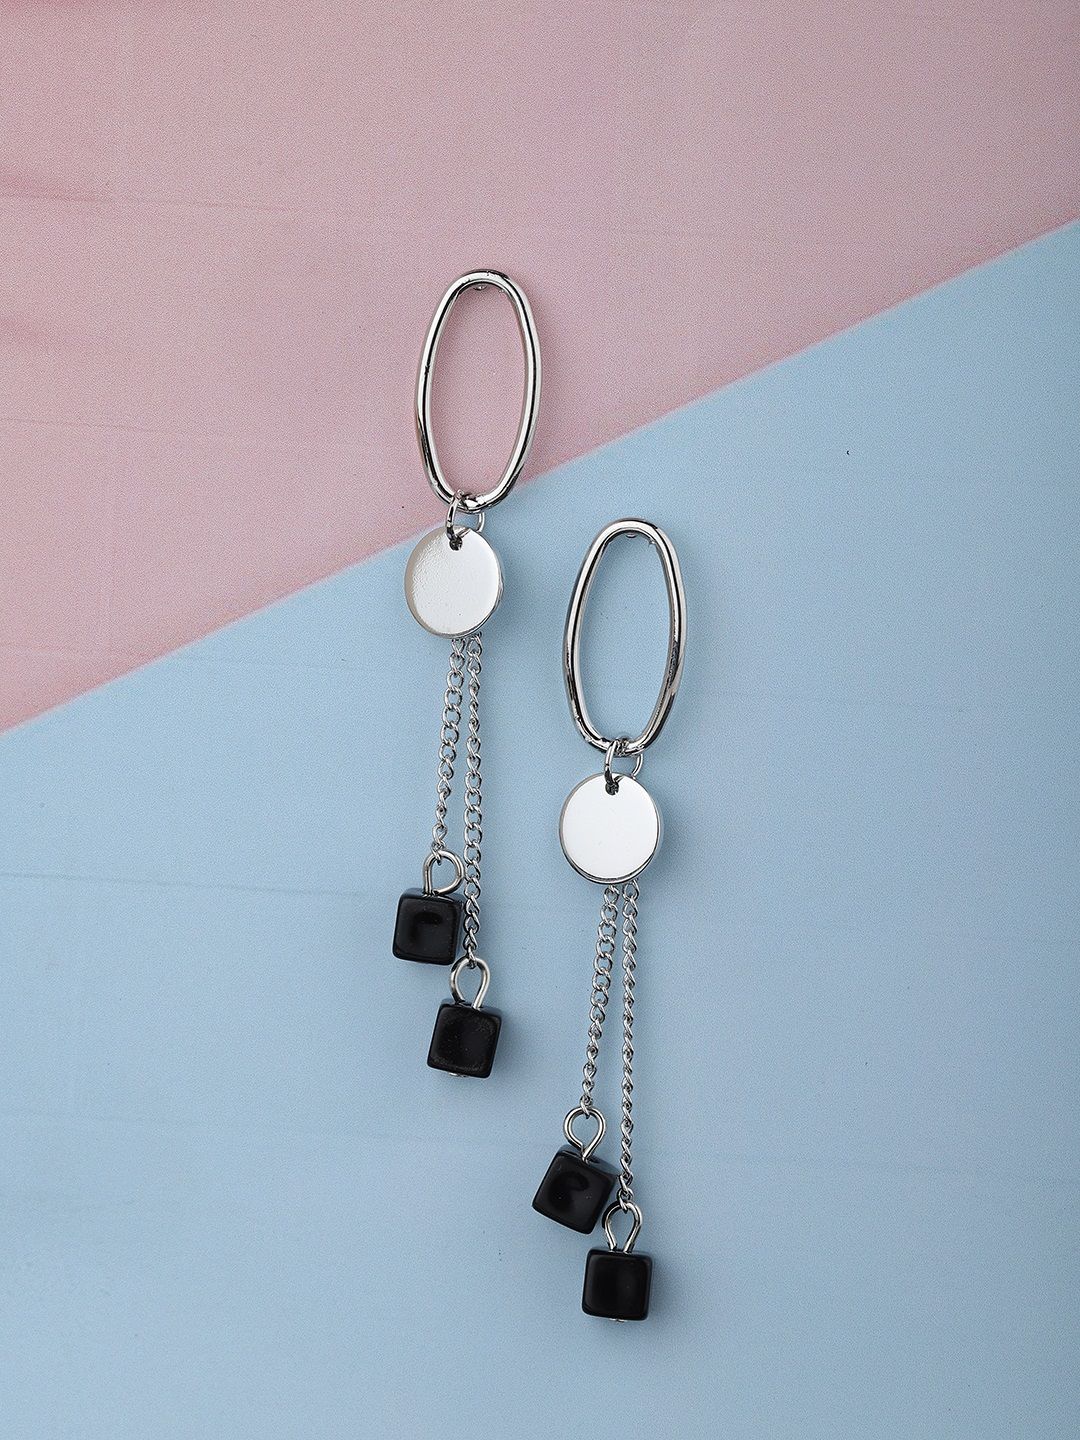 Carlton London Black & Silver-Toned Rhodium-Plated Contemporary Drop Earrings Price in India